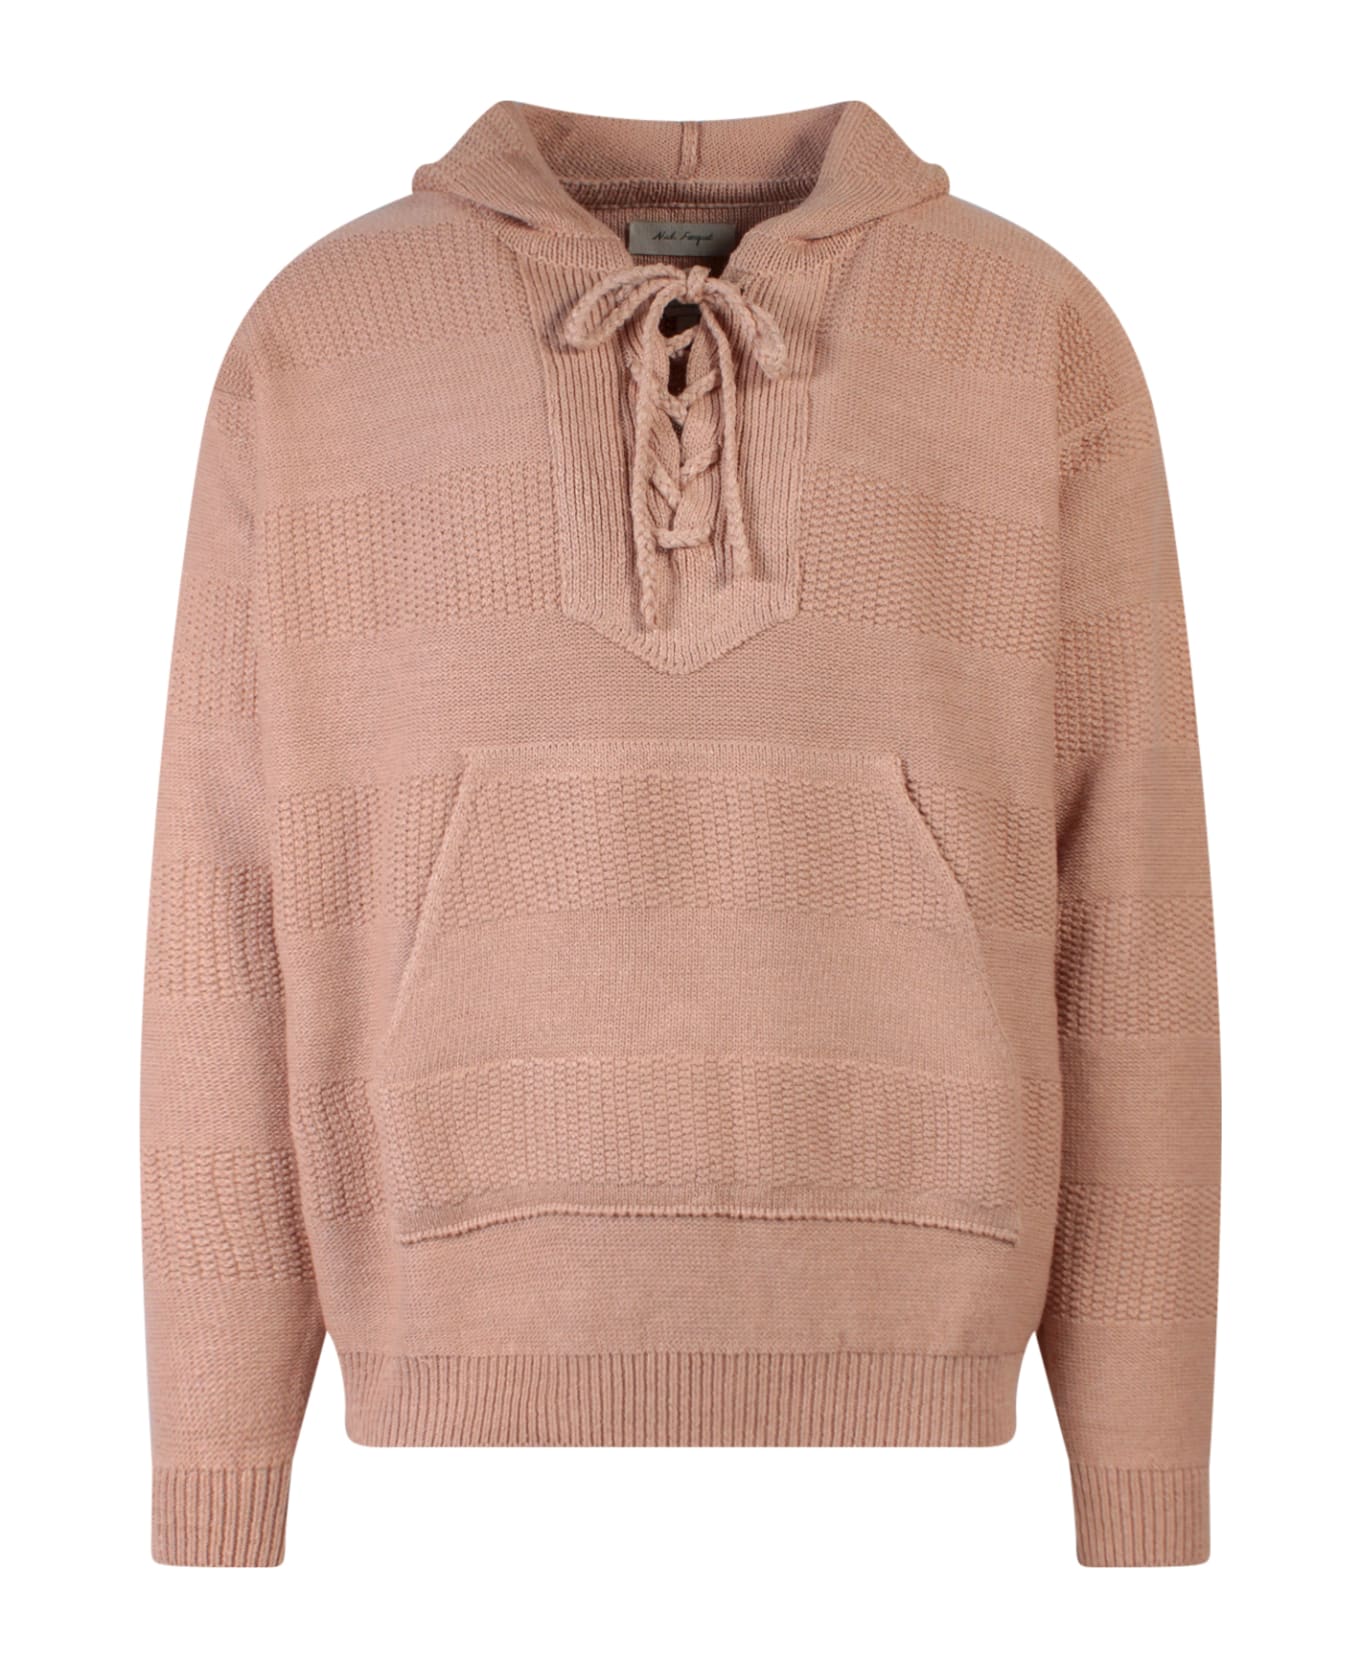 Nick Fouquet Sweater - Pink